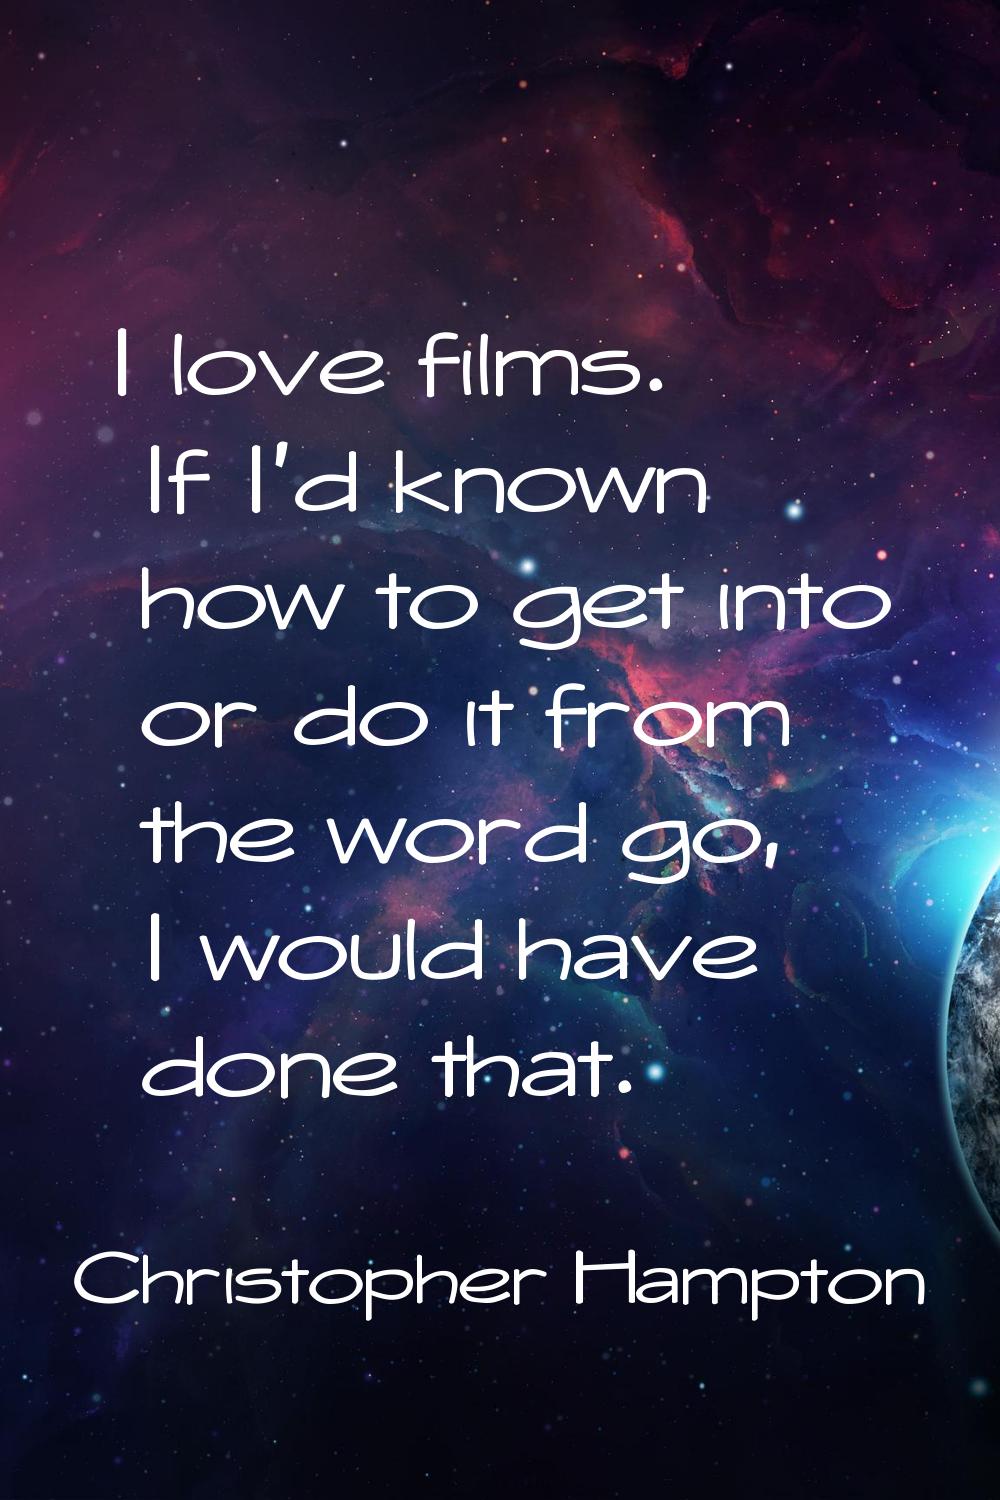 I love films. If I'd known how to get into or do it from the word go, I would have done that.